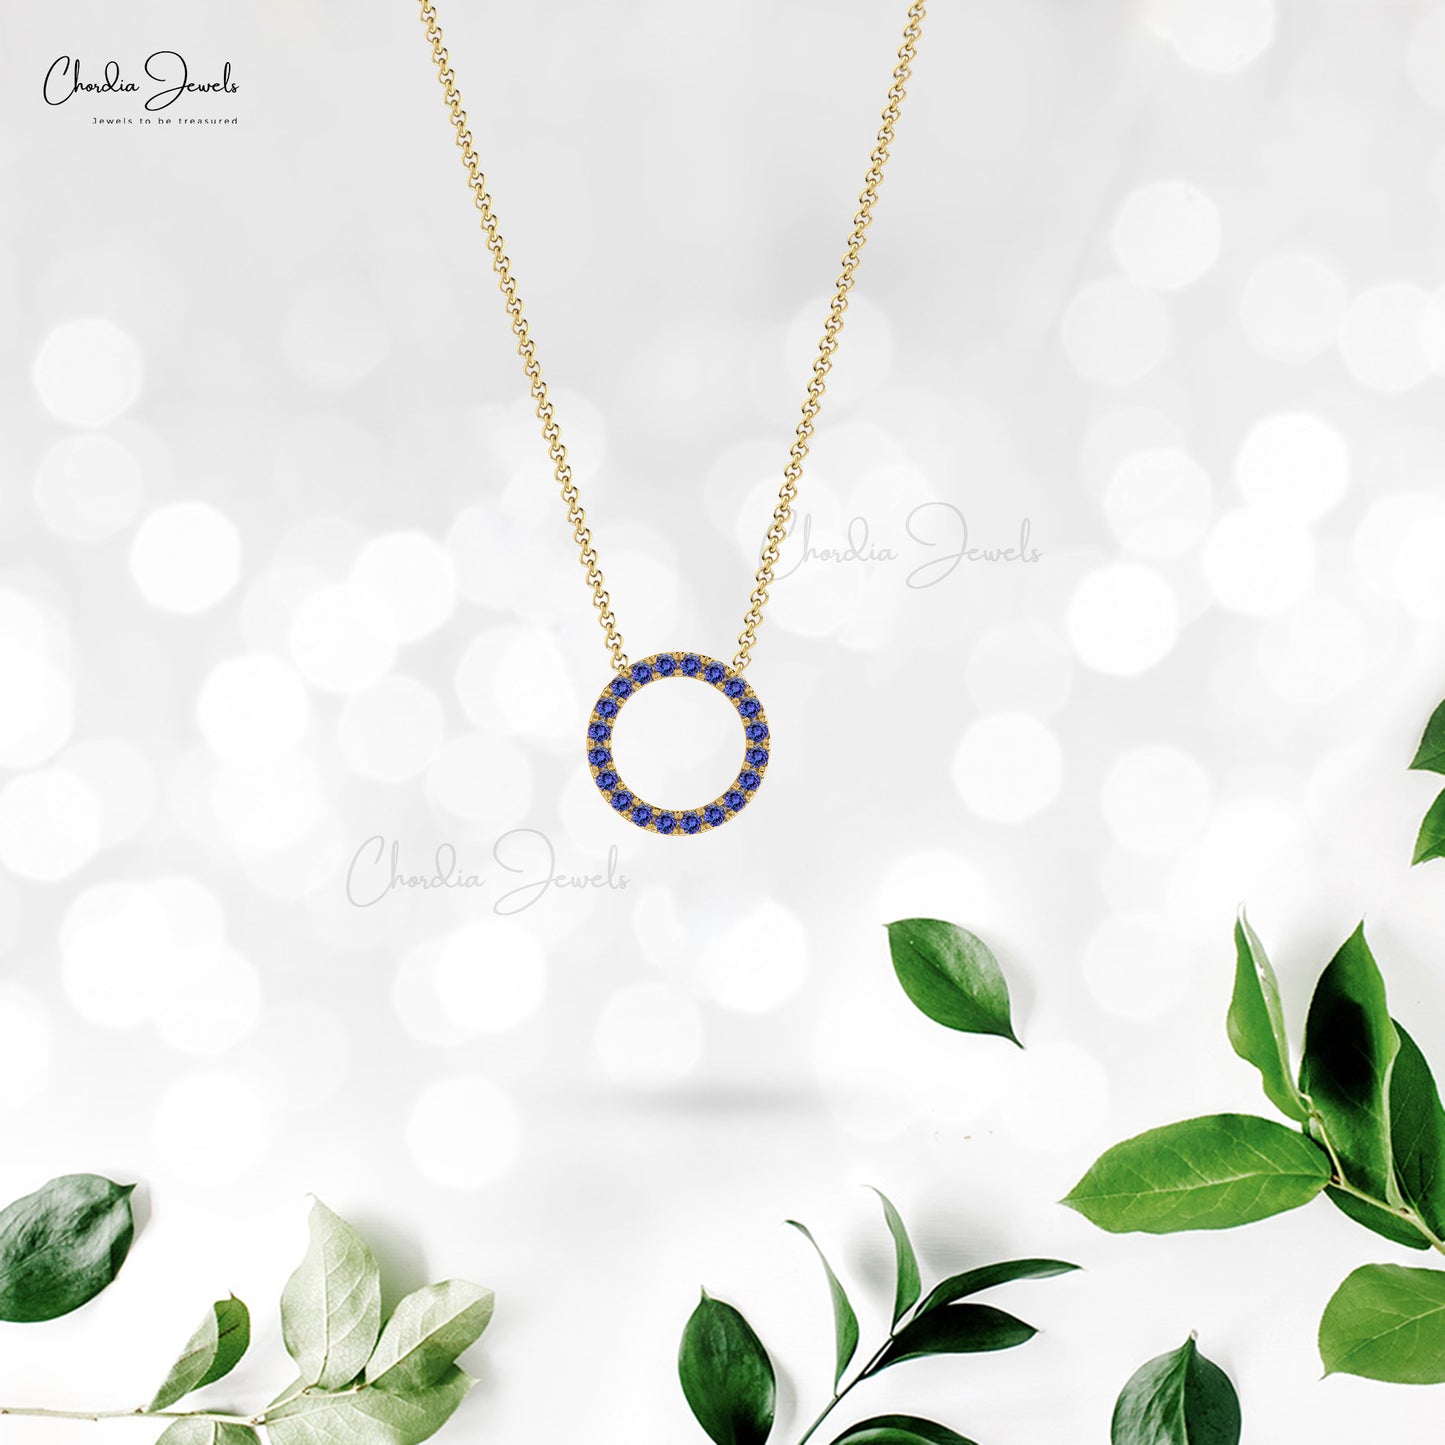 Circle Necklace Pendant in 14k Real Gold Genuine Blue Tanzanite Pave Set Gemstone Light Weight Jewelry For Women